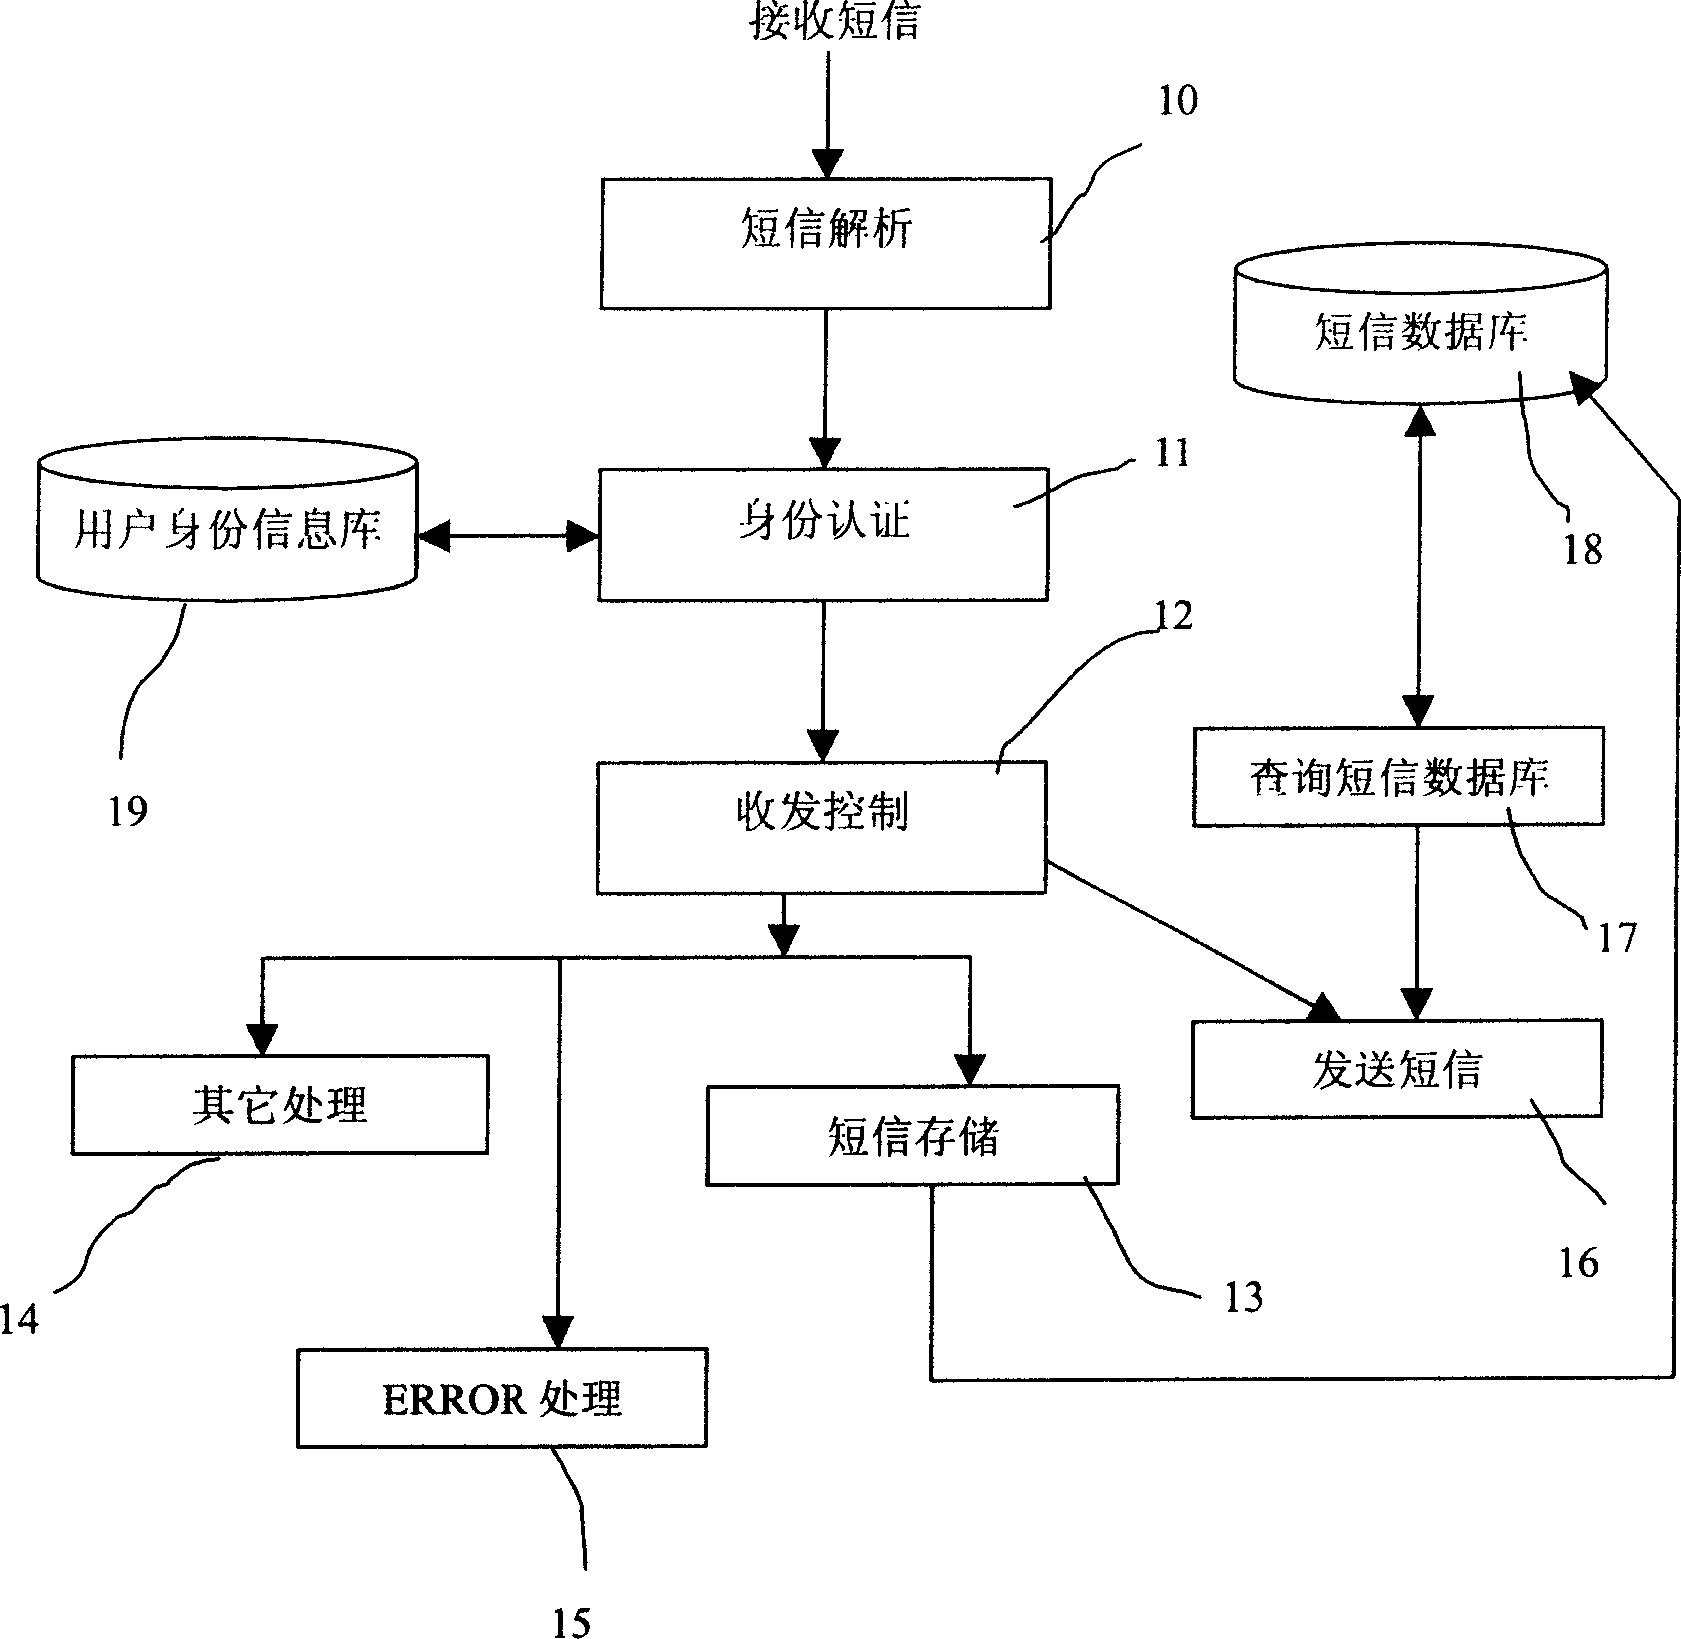 Method and system for transmitting and receiving short message in radio local area network customer's end